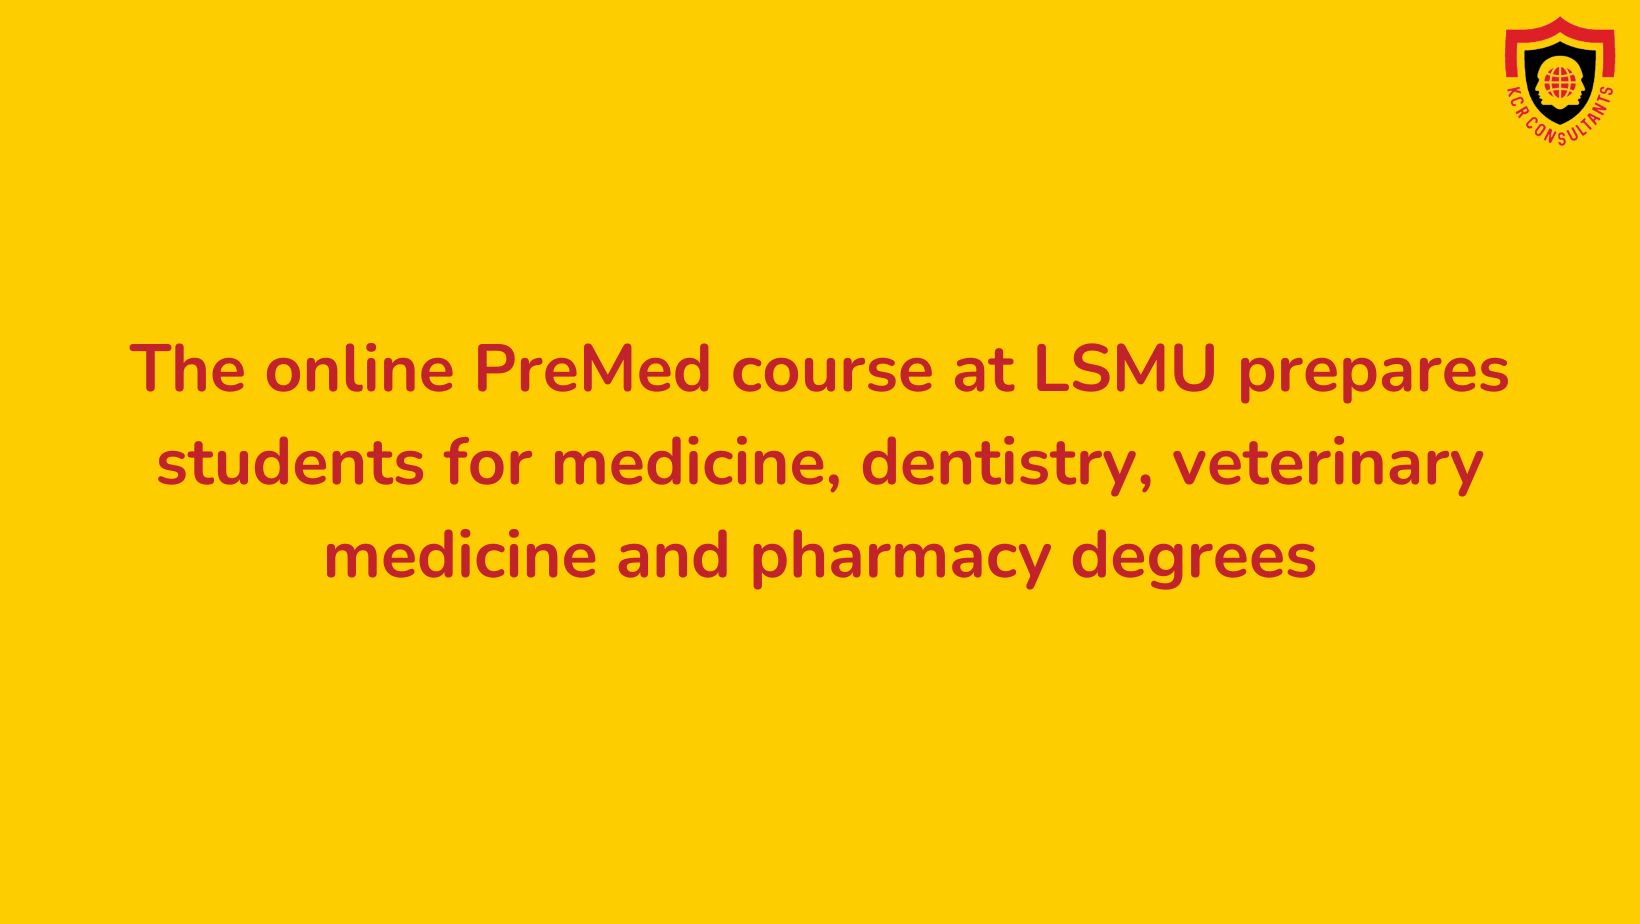 Lithuanian University of Health Sciences - KCR Consultants - Online Premed course